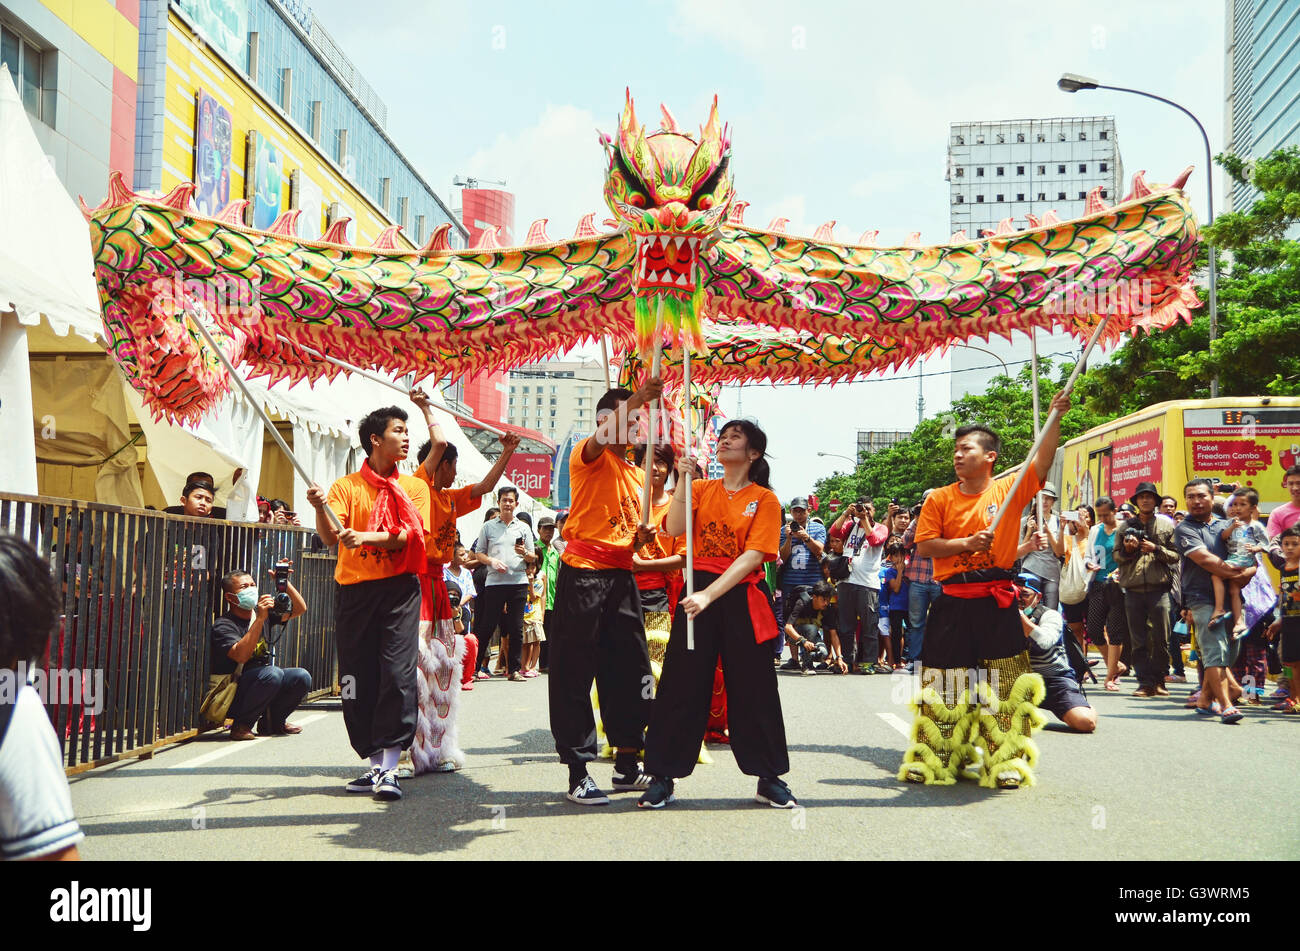 Jakarta, Indonesia. Feb 21 2015. Teenagers holding Liong (Chinese Dragon) to perform a Liong dance in Festival of Cap Go Meh Stock Photo